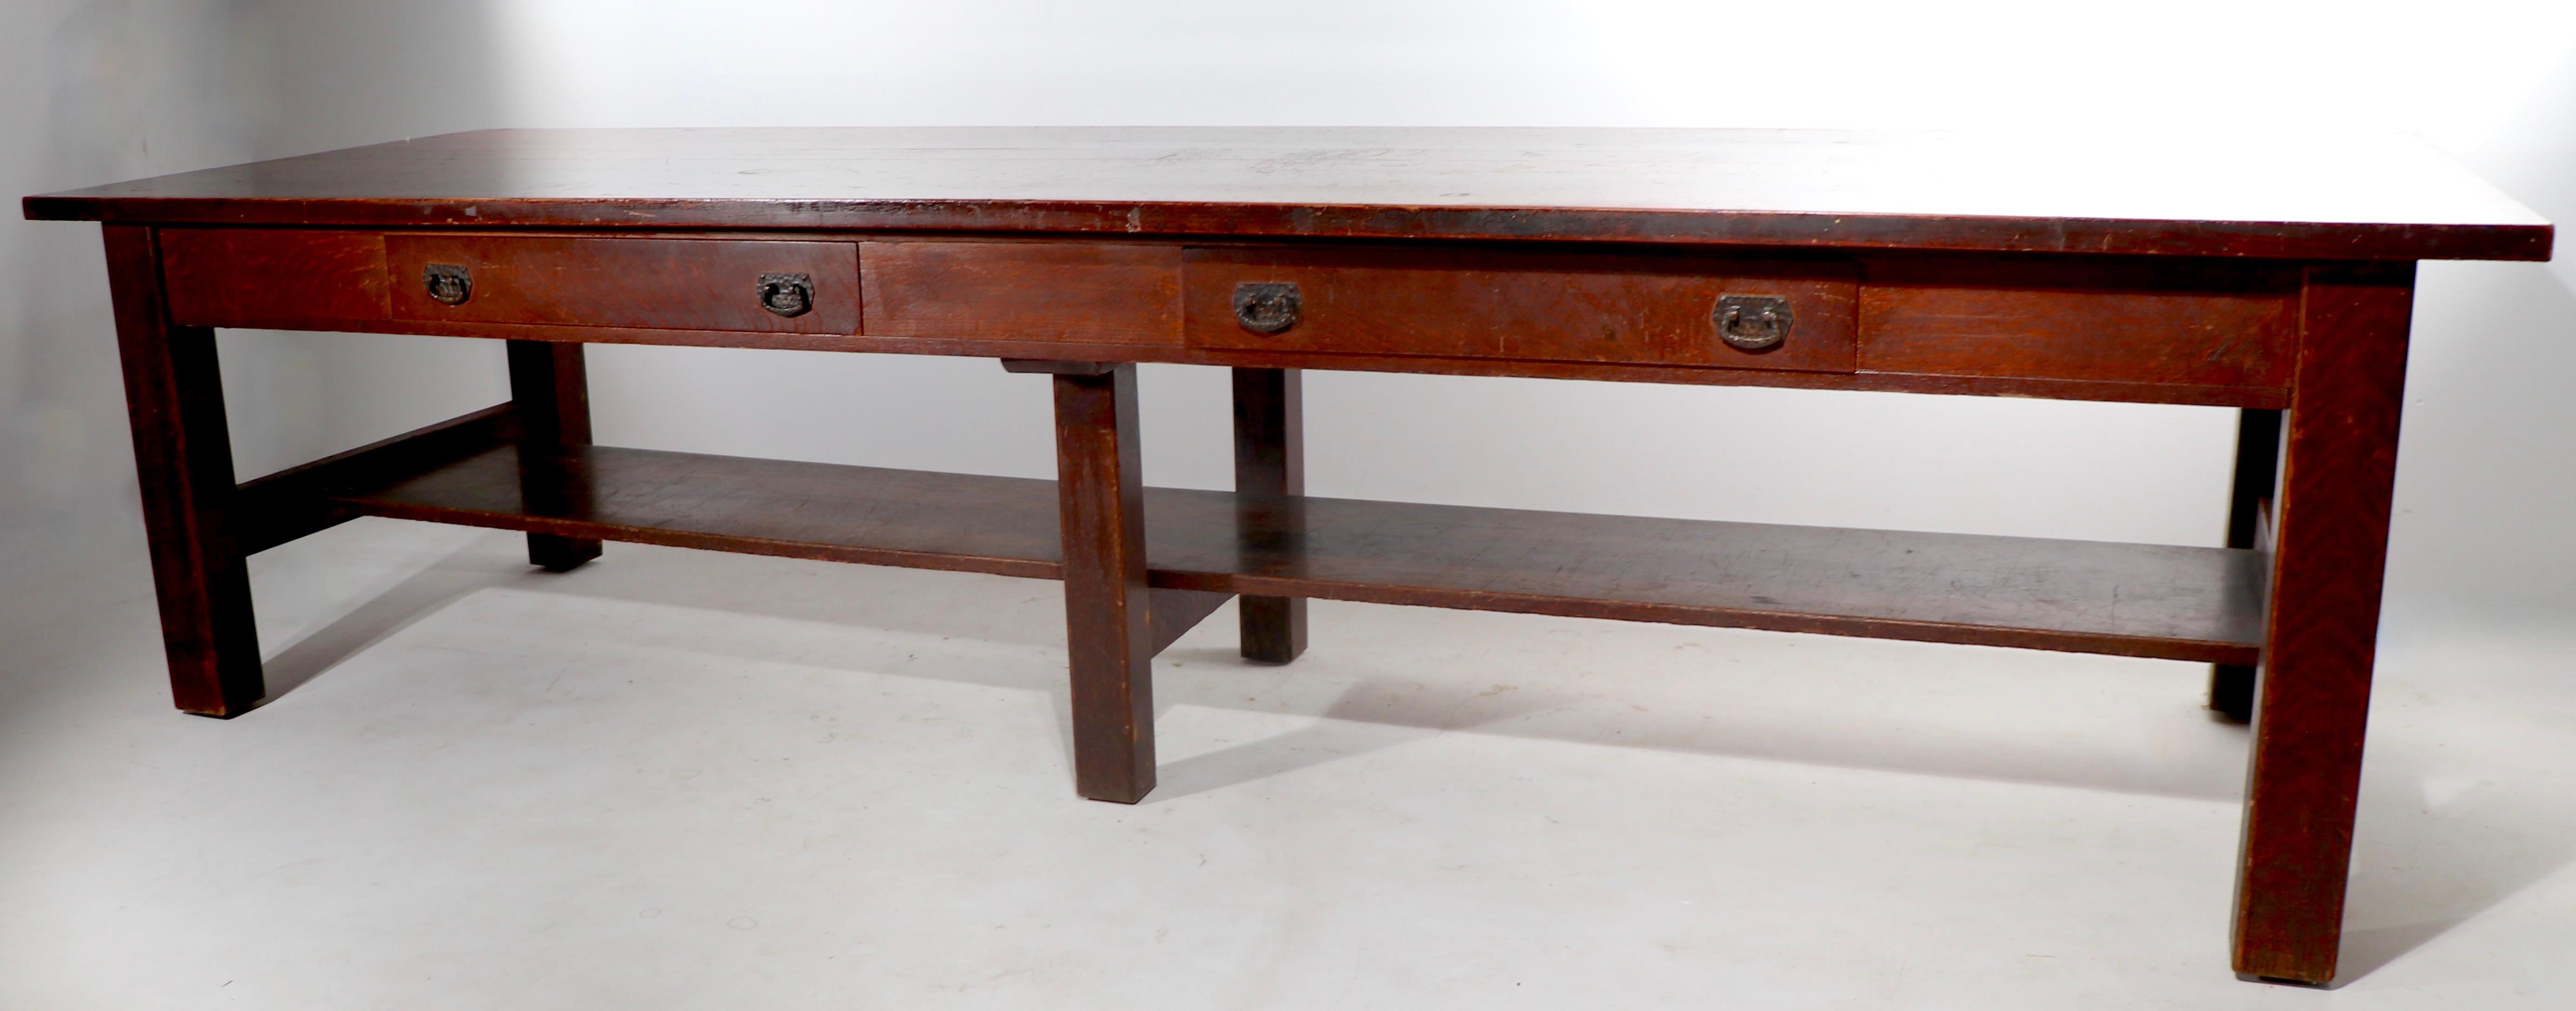 Arts and Crafts Massive Arts & Crafts Mission Oak Conference Dining Table by J. M. Young For Sale